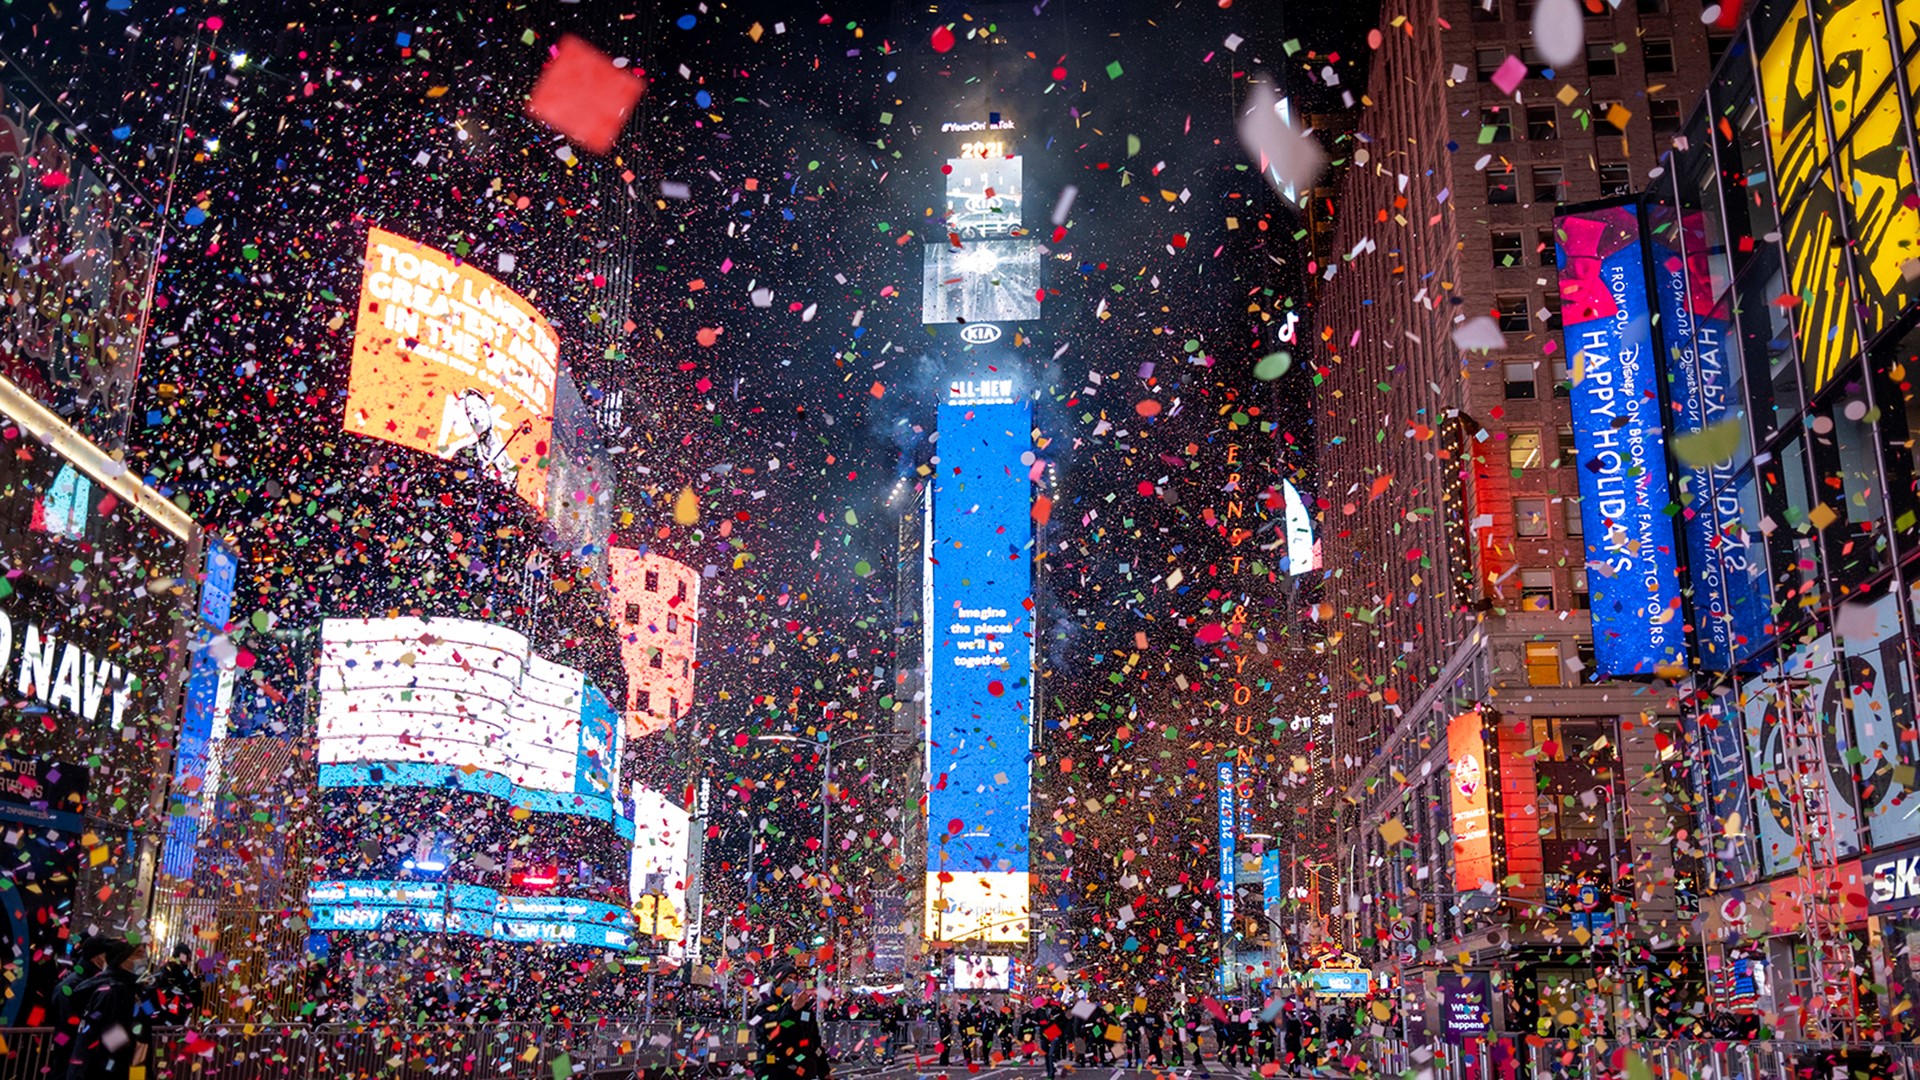 New is the world celebrating New Year's Eve amid a pandemic